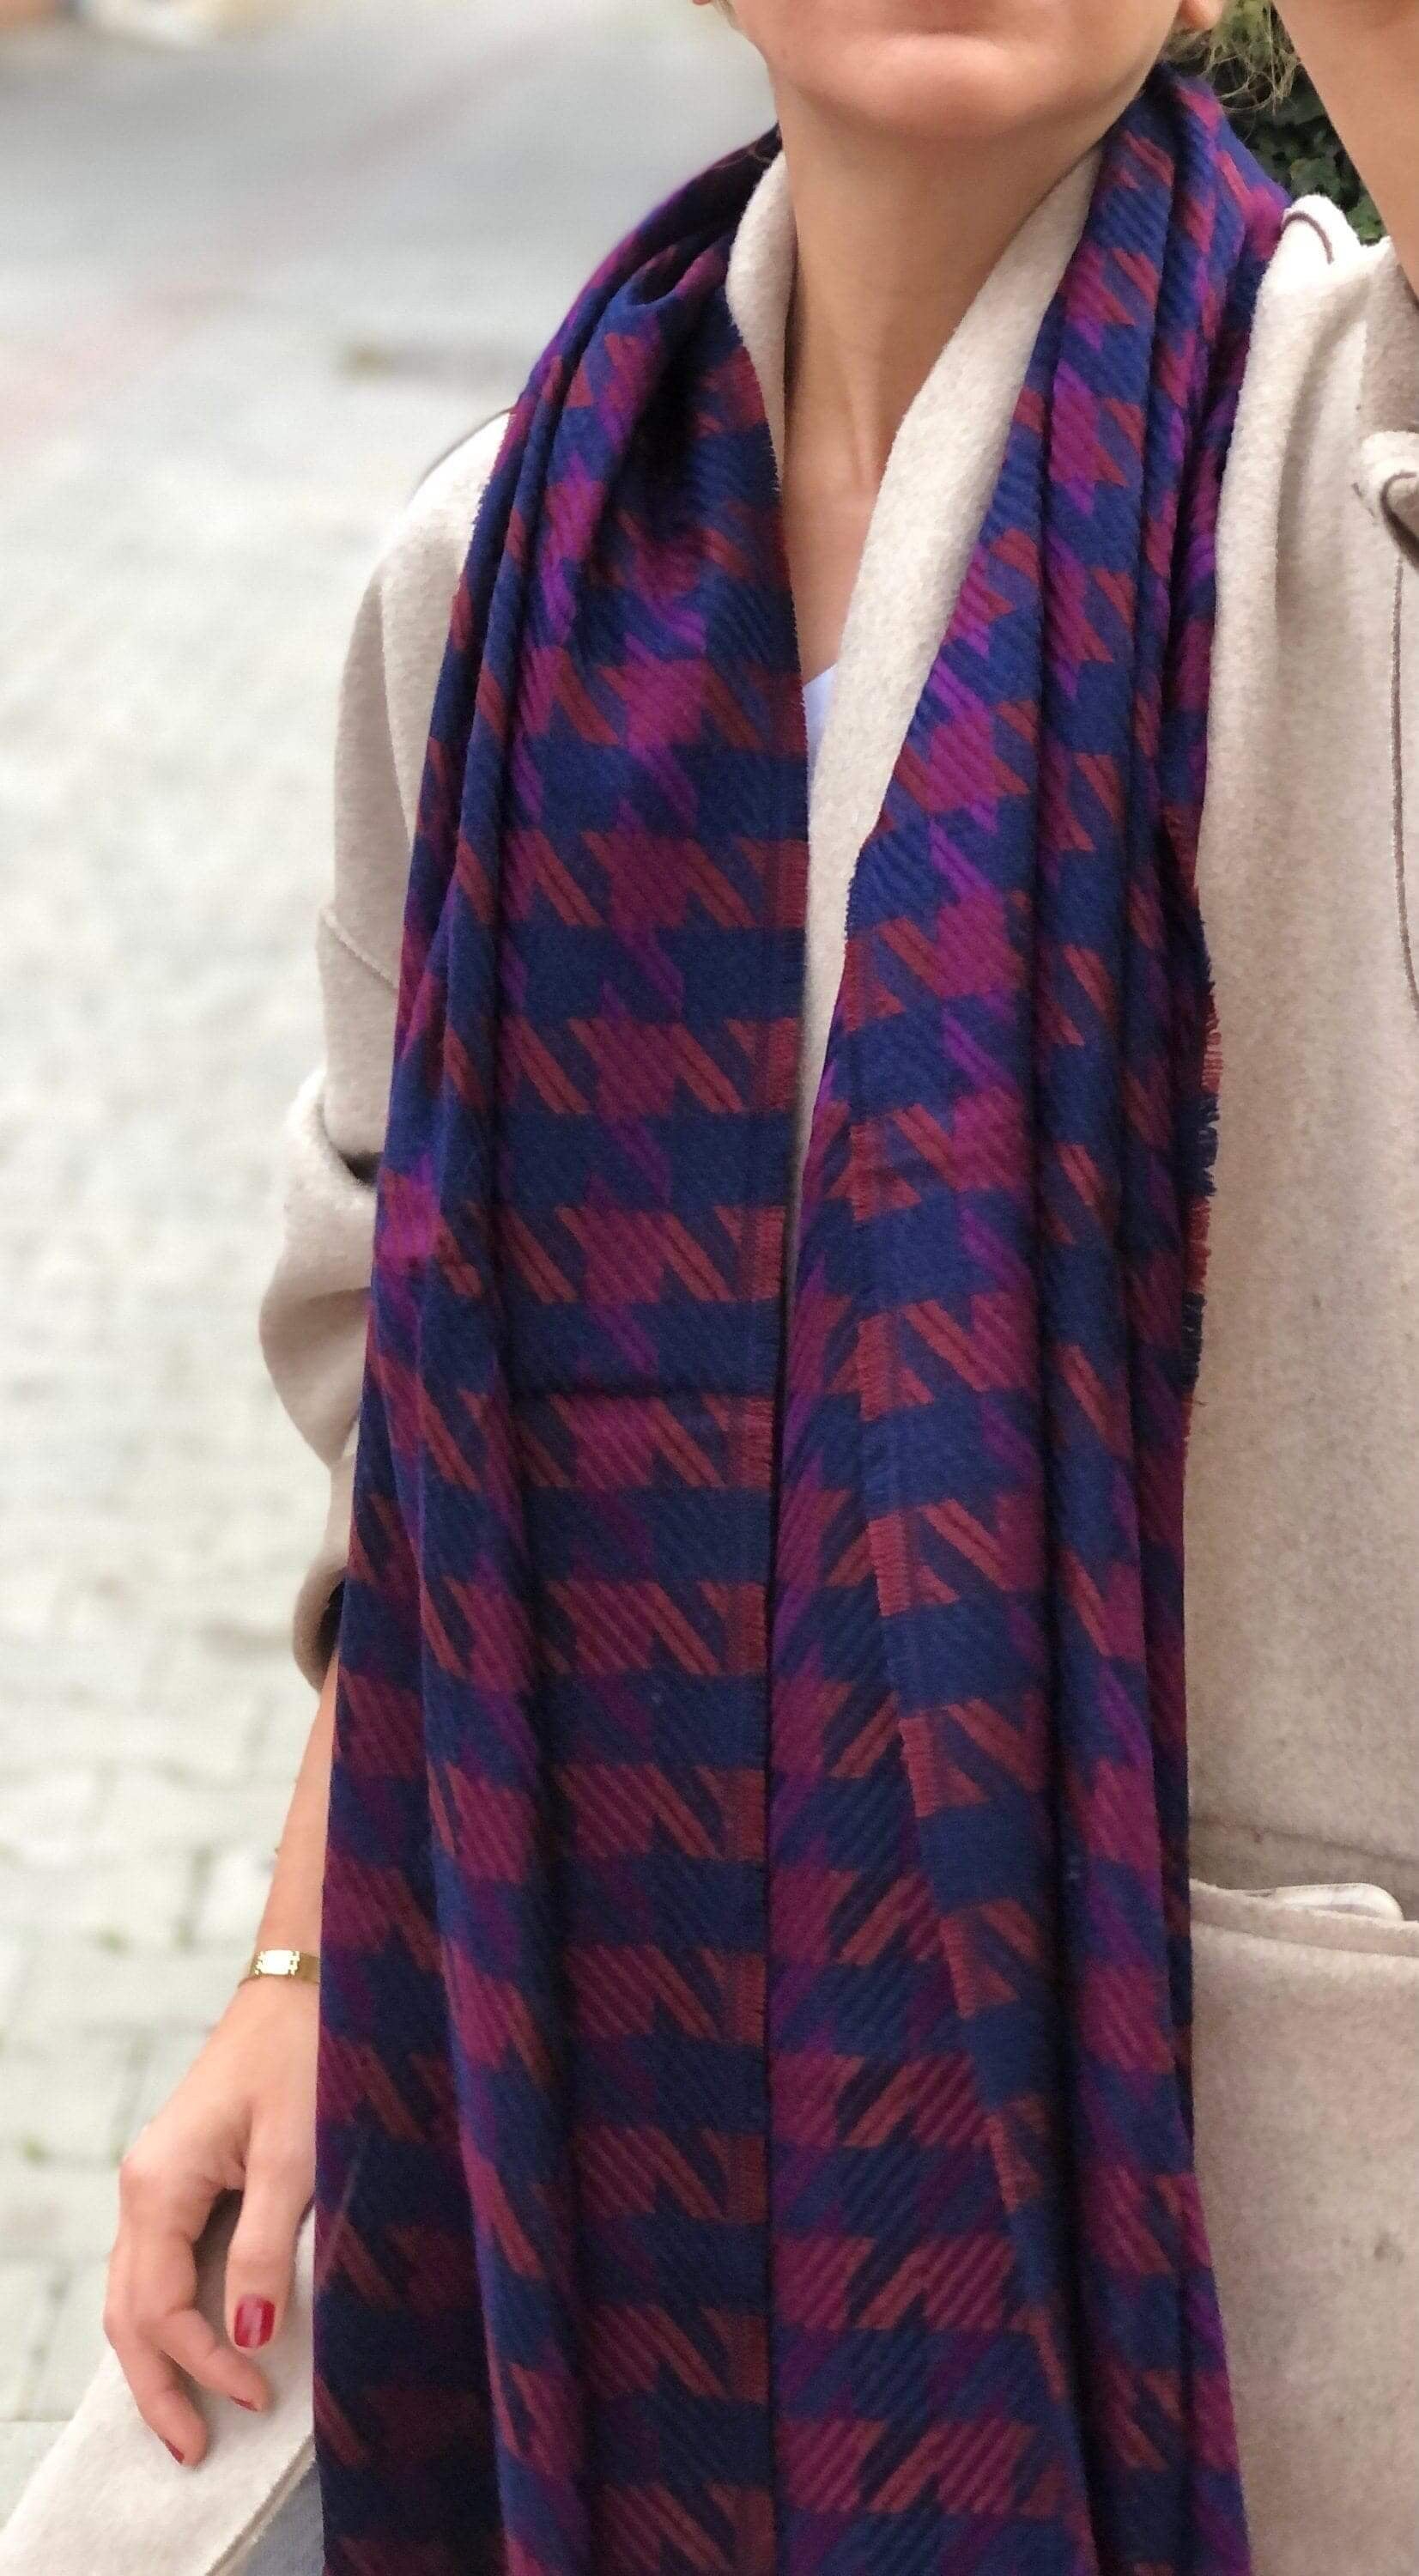 Elevate her accessory collection with this warm and stylish shawl, made from wool and acrylic cotton and perfect for any season.